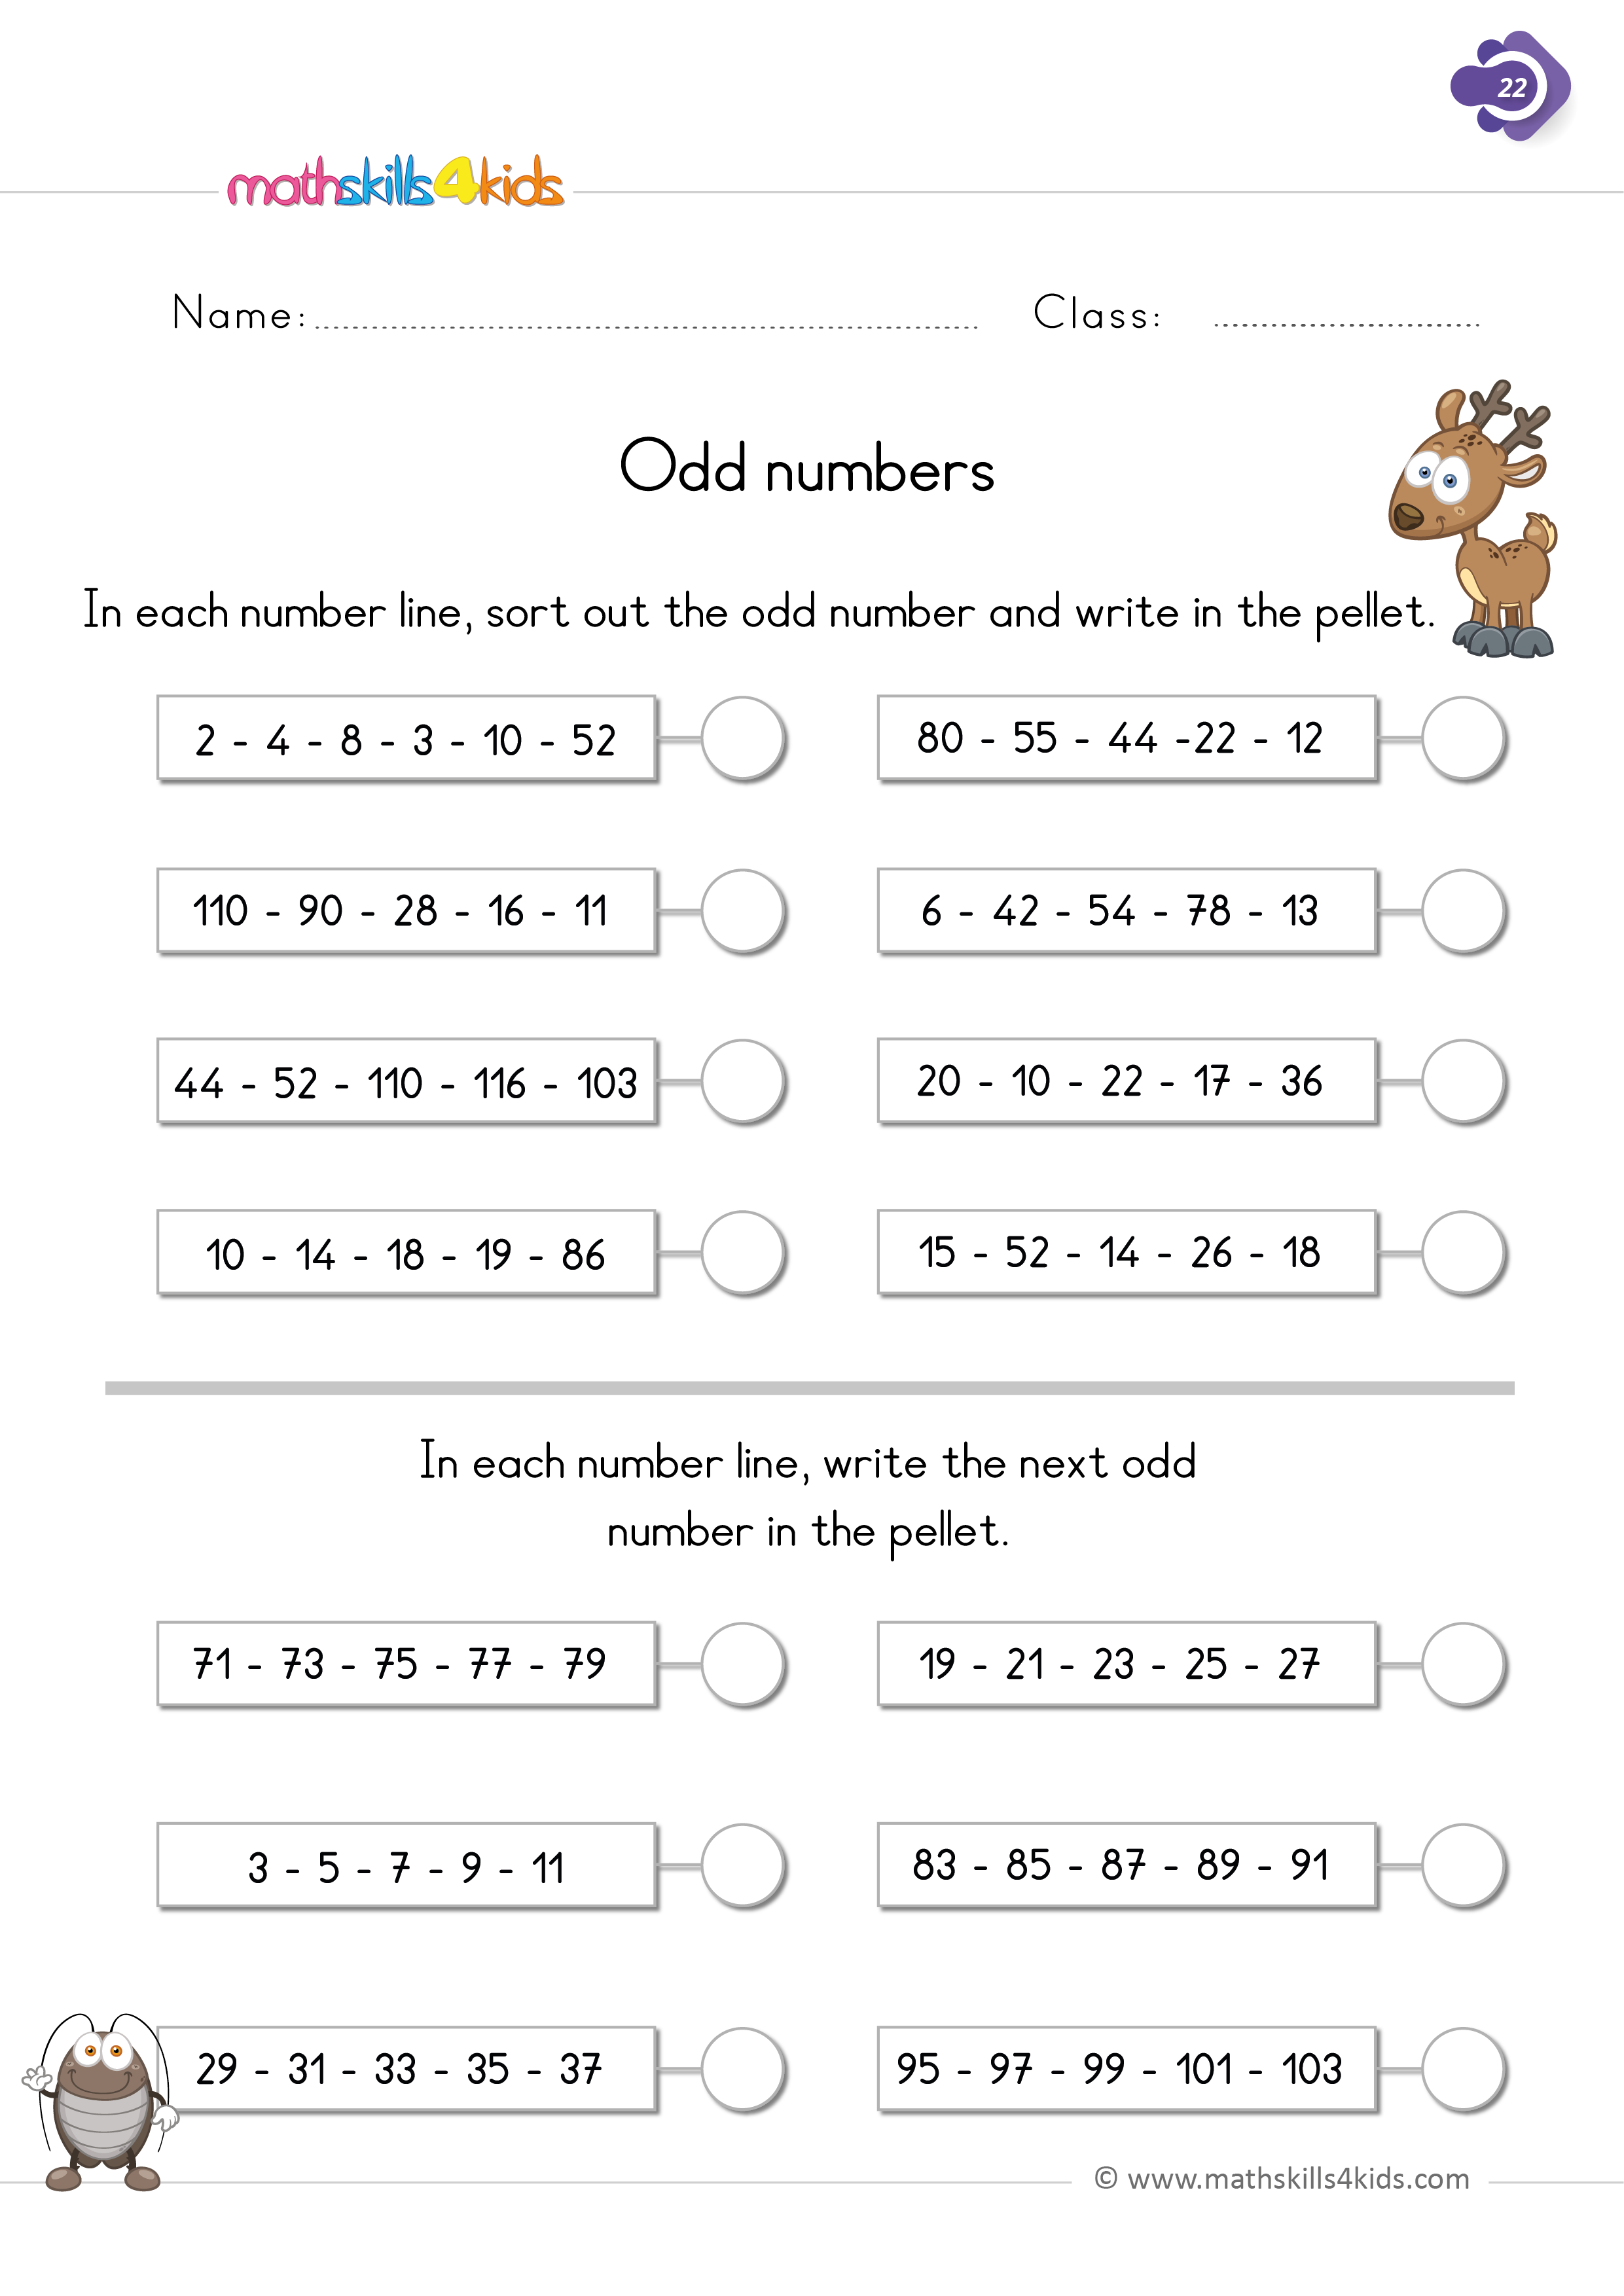 First Grade math worksheets - even and odd numbers - complete the missing numbers